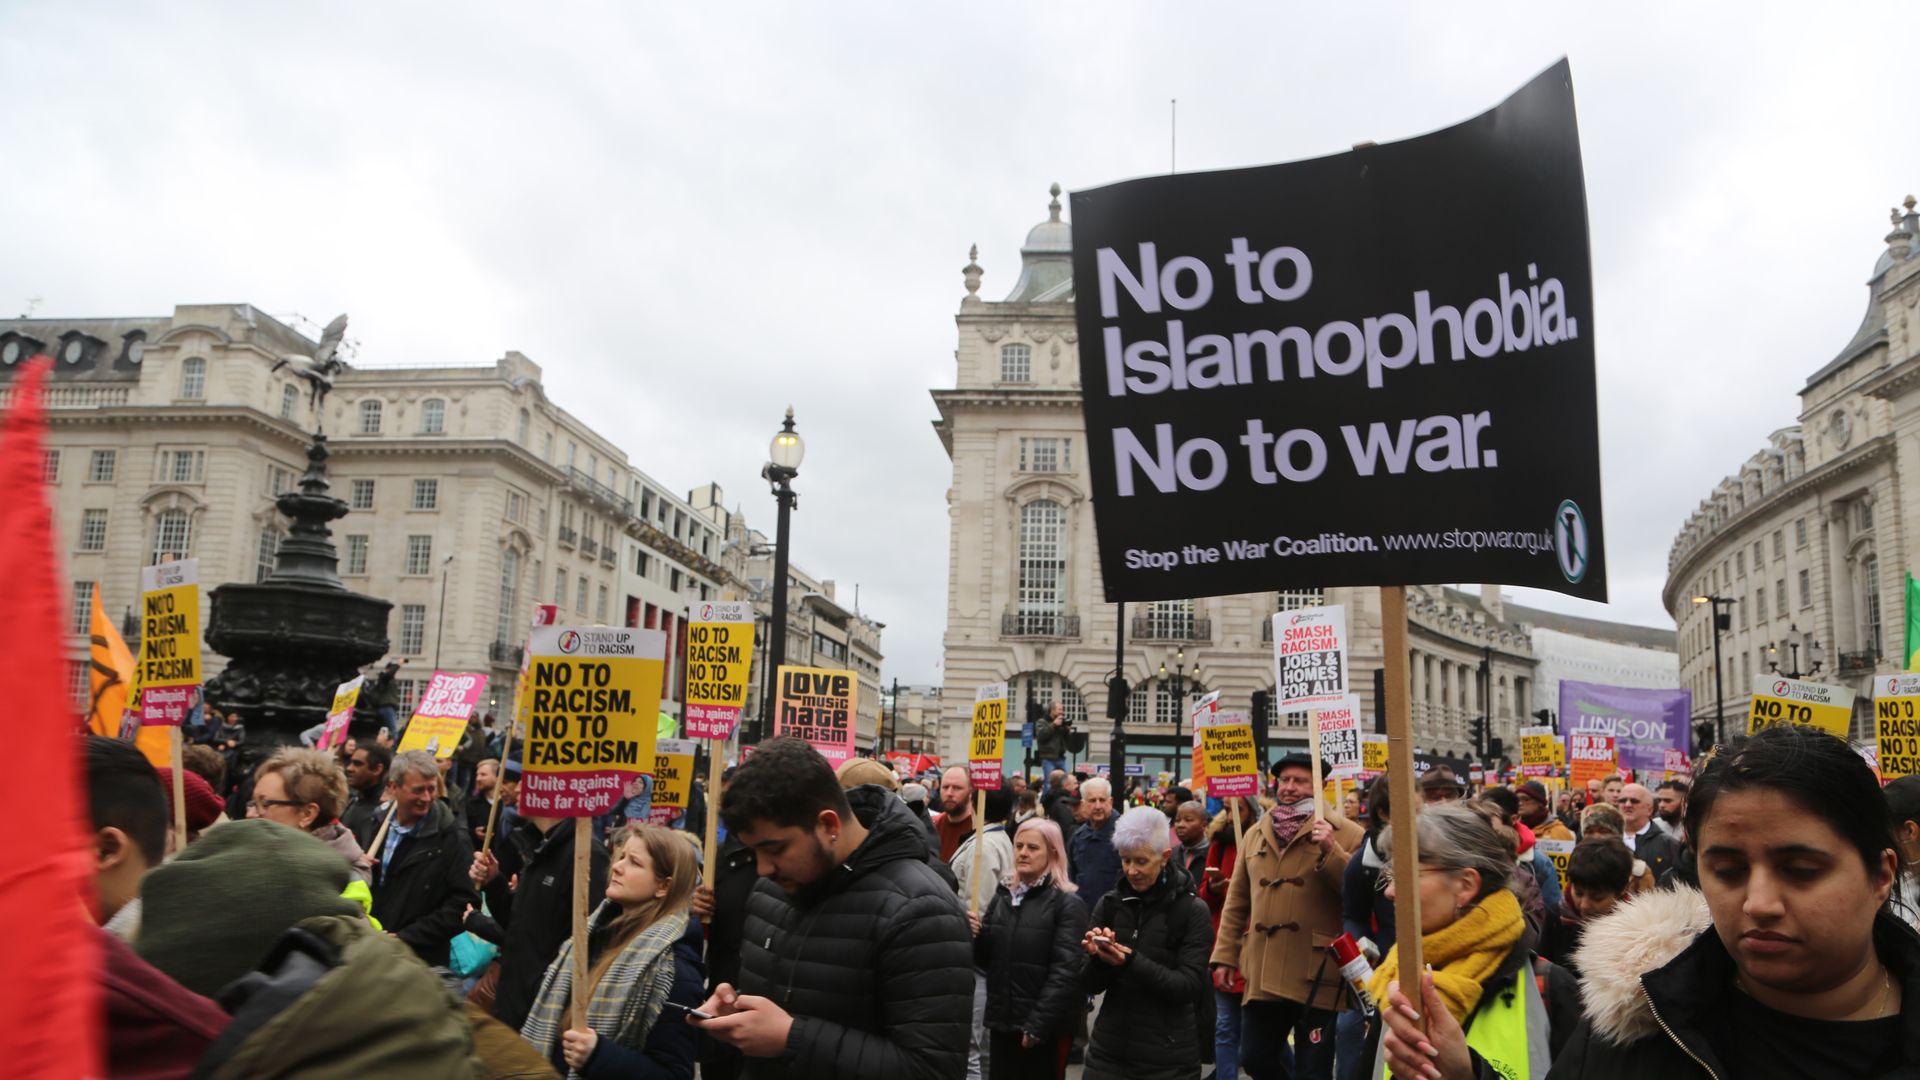 Protestors hold signs in a London square. The closest sign reads: "No to islamophobia. No to war."